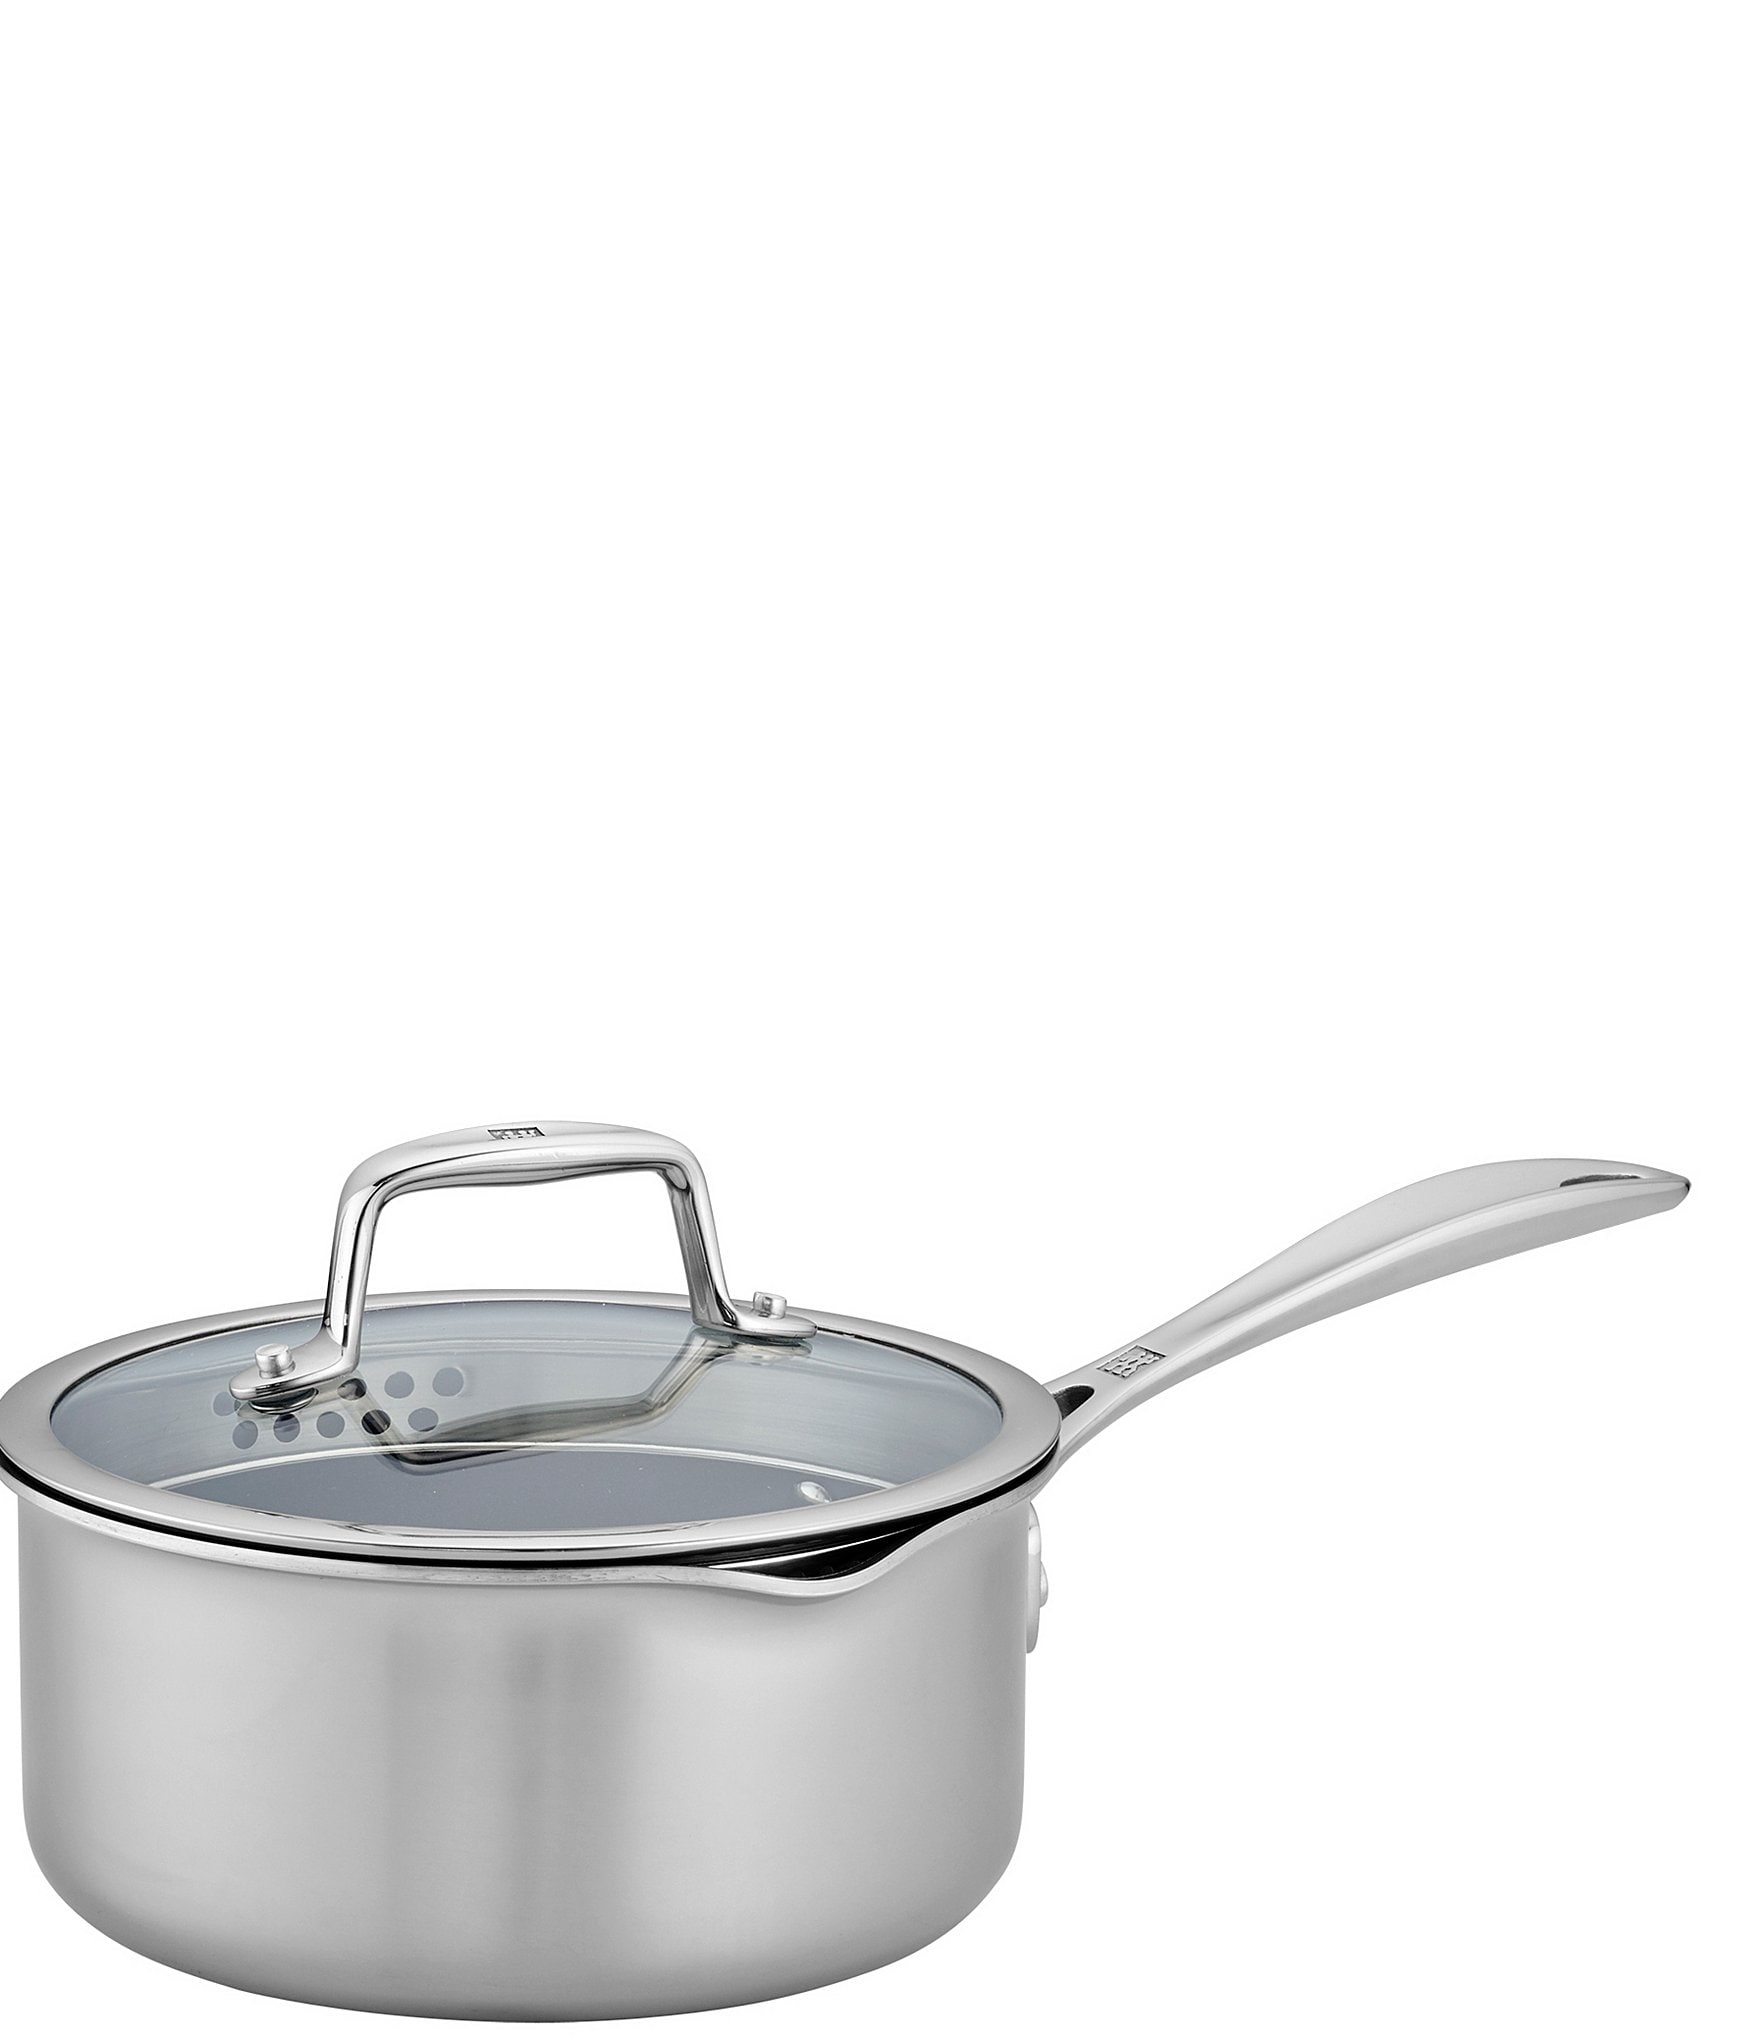 2 qt Stainless Steel Cookware Saucepan with Lid